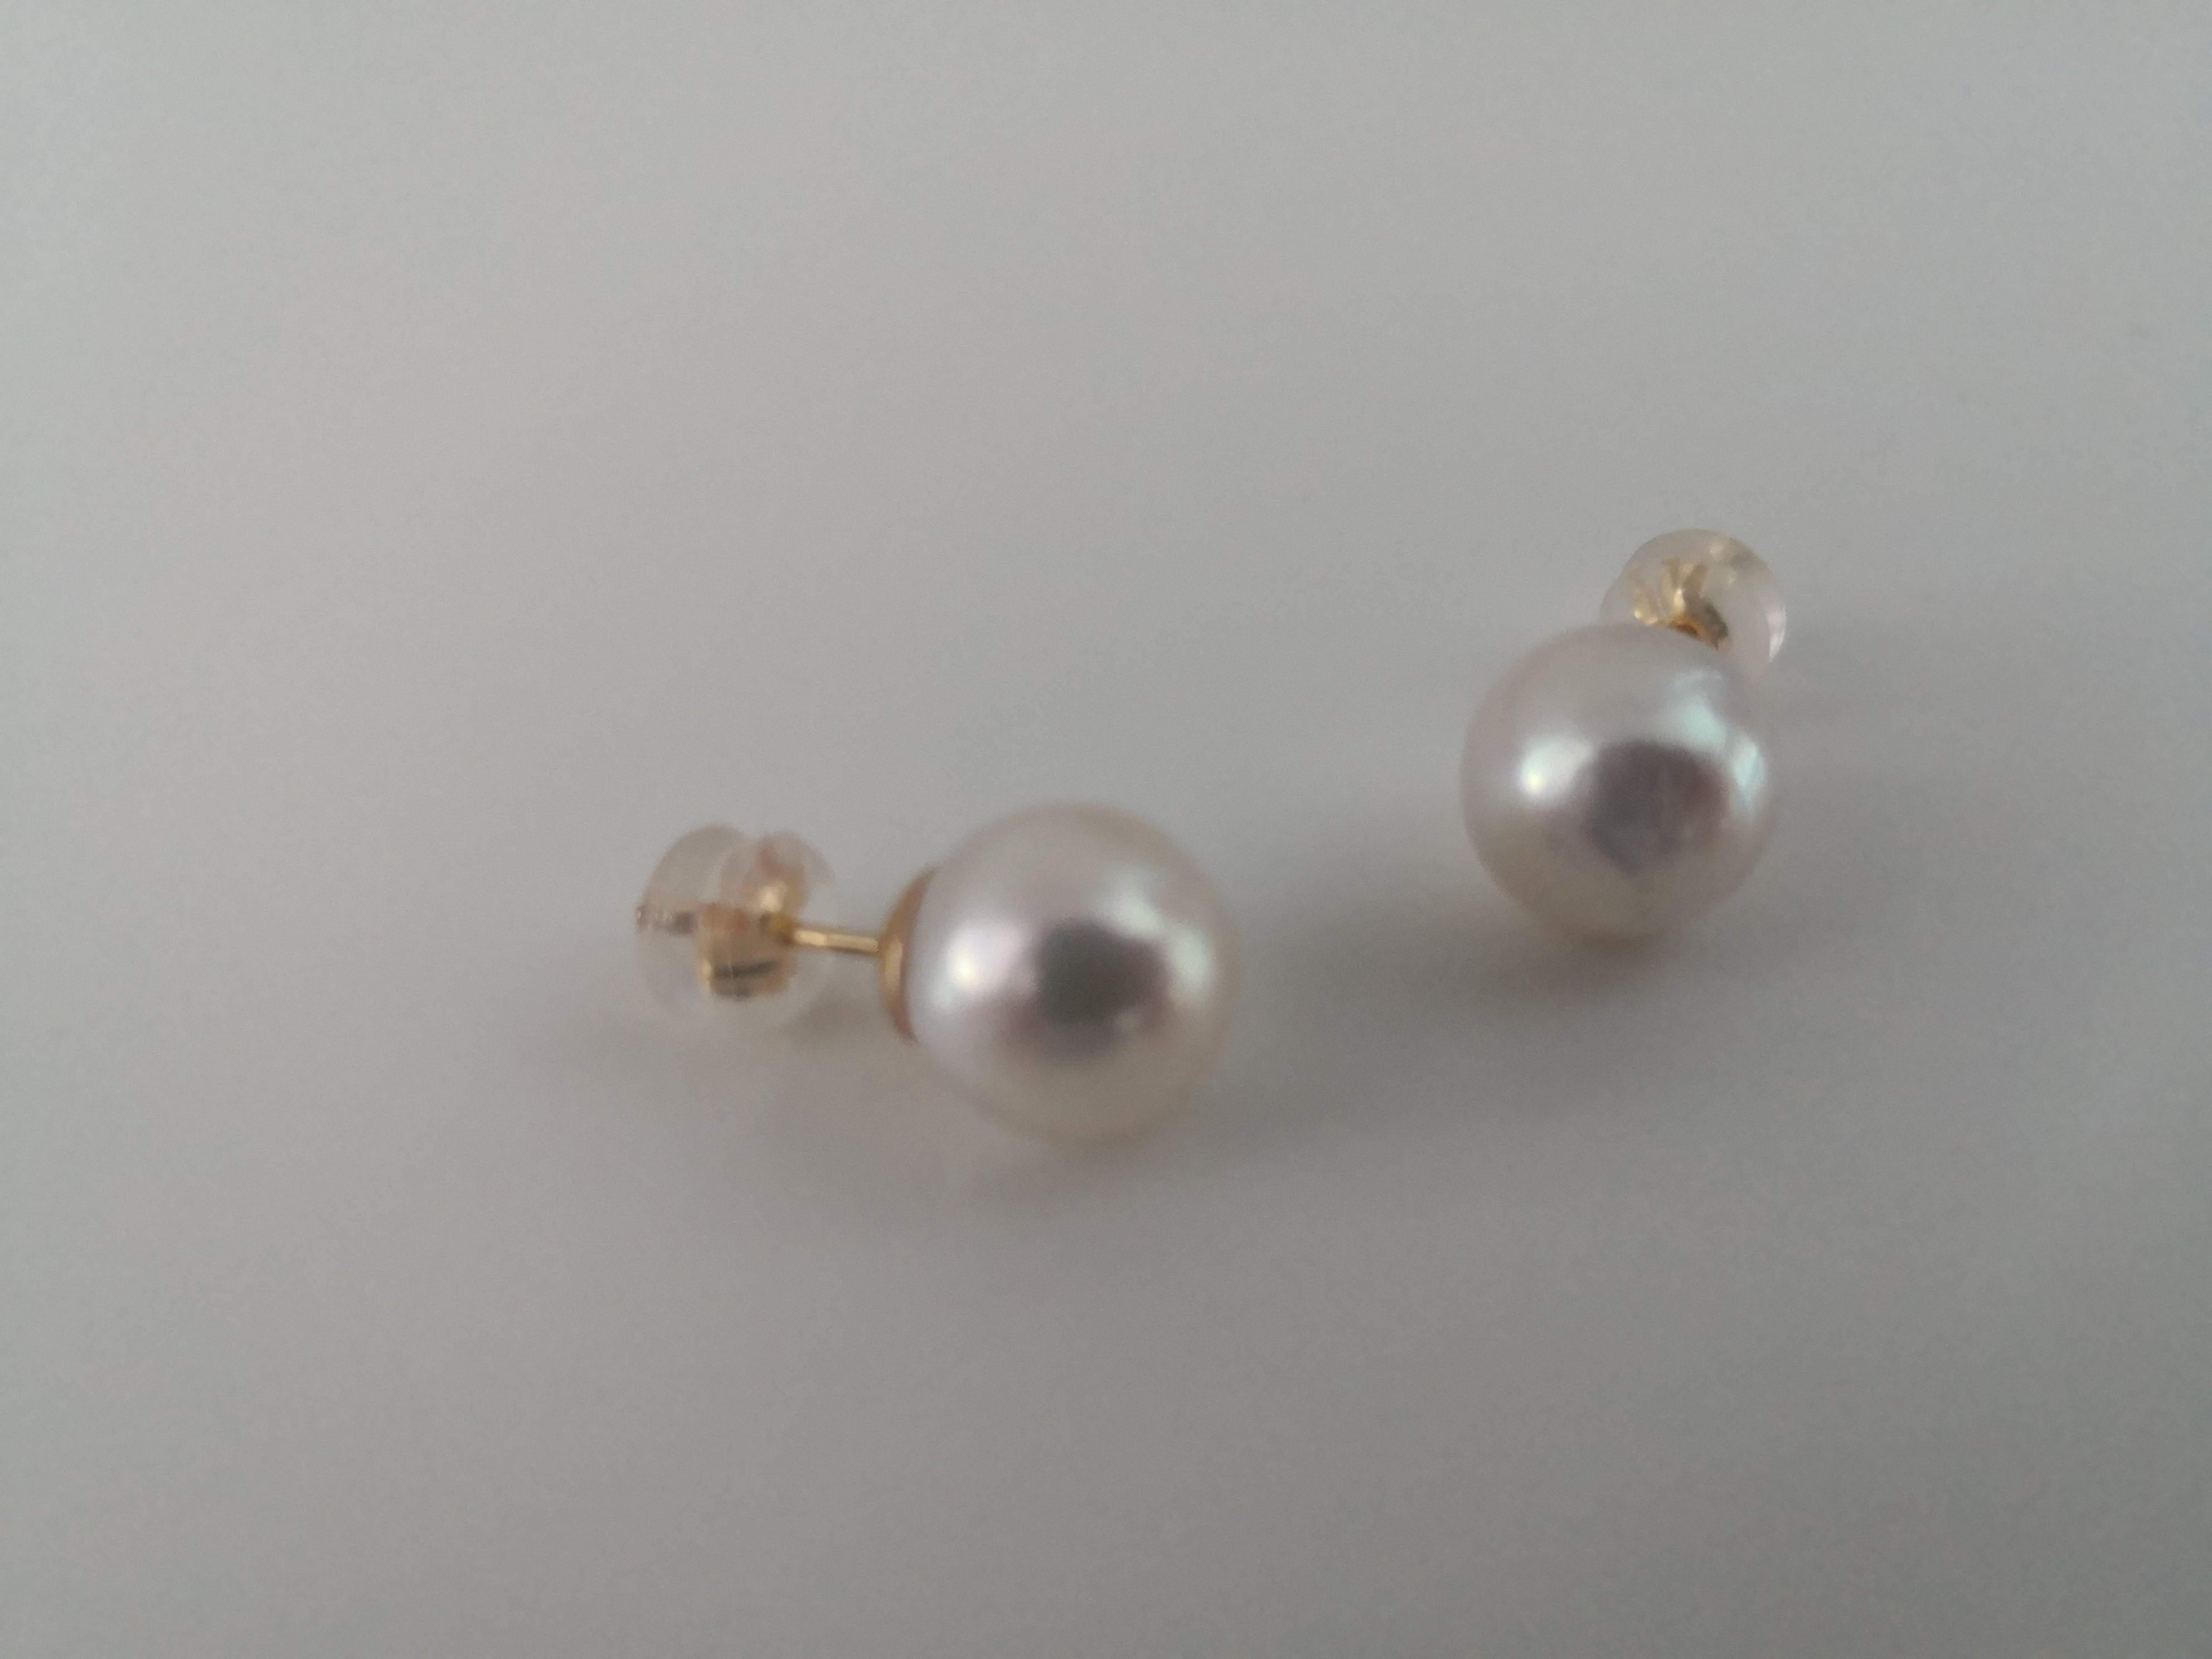 - Japanse Akoya Cultured Pearls

- Country of origin: Japan Sea waters

- Produced by Akoya Oyster 

-  Size 8-8.5 mm of diameter

- Very High-Quality luster and orient

- White Color

- Pearls of round shape

- 18K yellow gold mounting

- 2